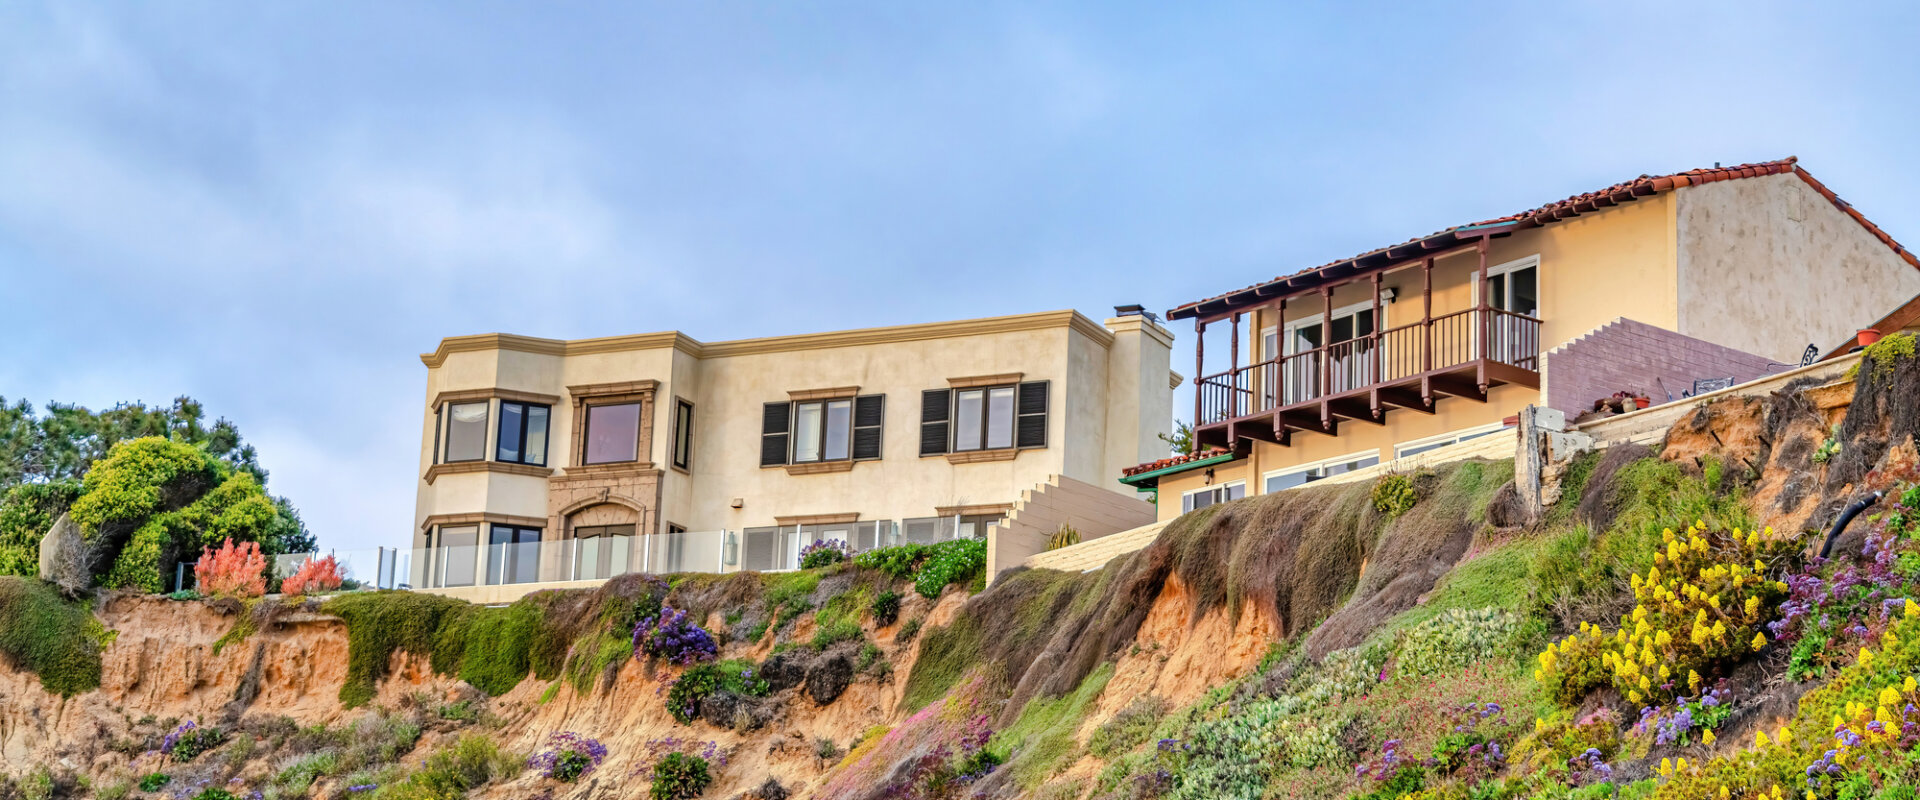 Top Real Estate Agents In North County San Diego, CA